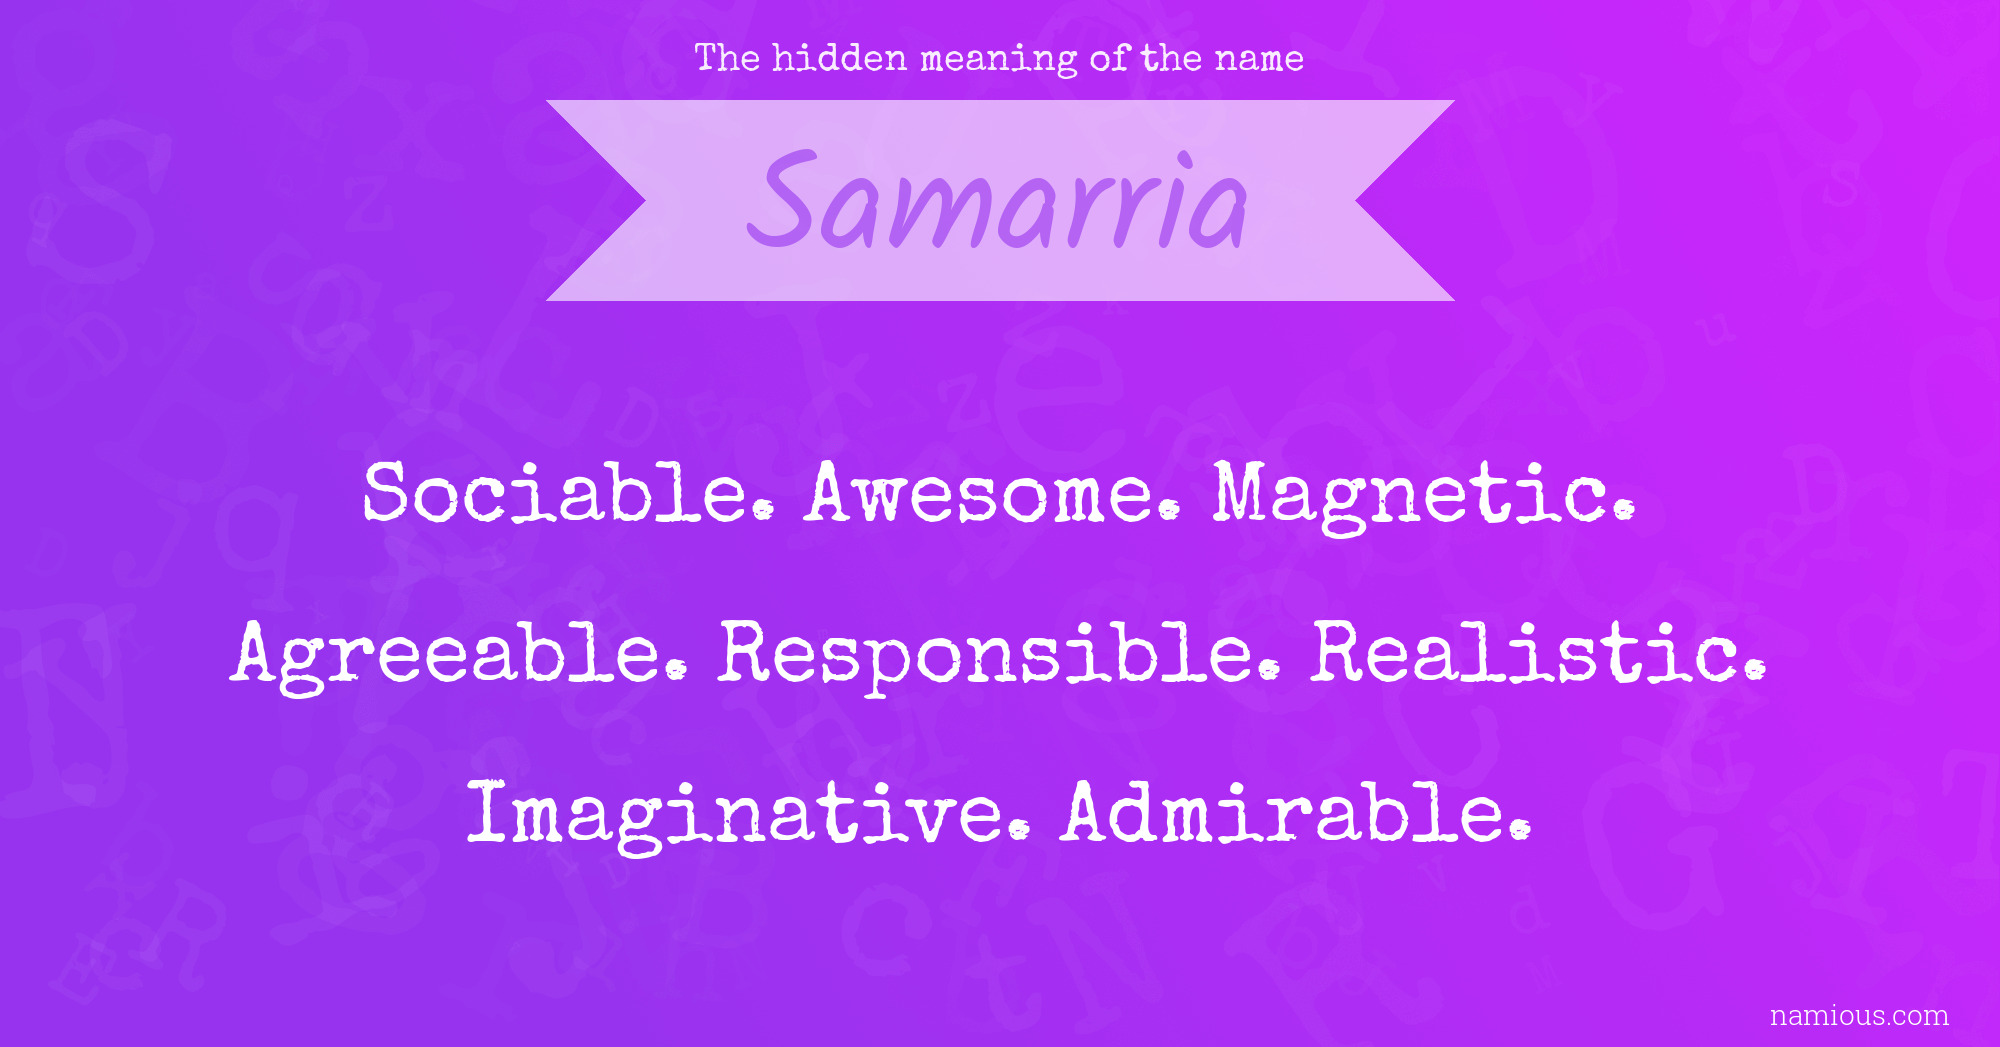 The hidden meaning of the name Samarria